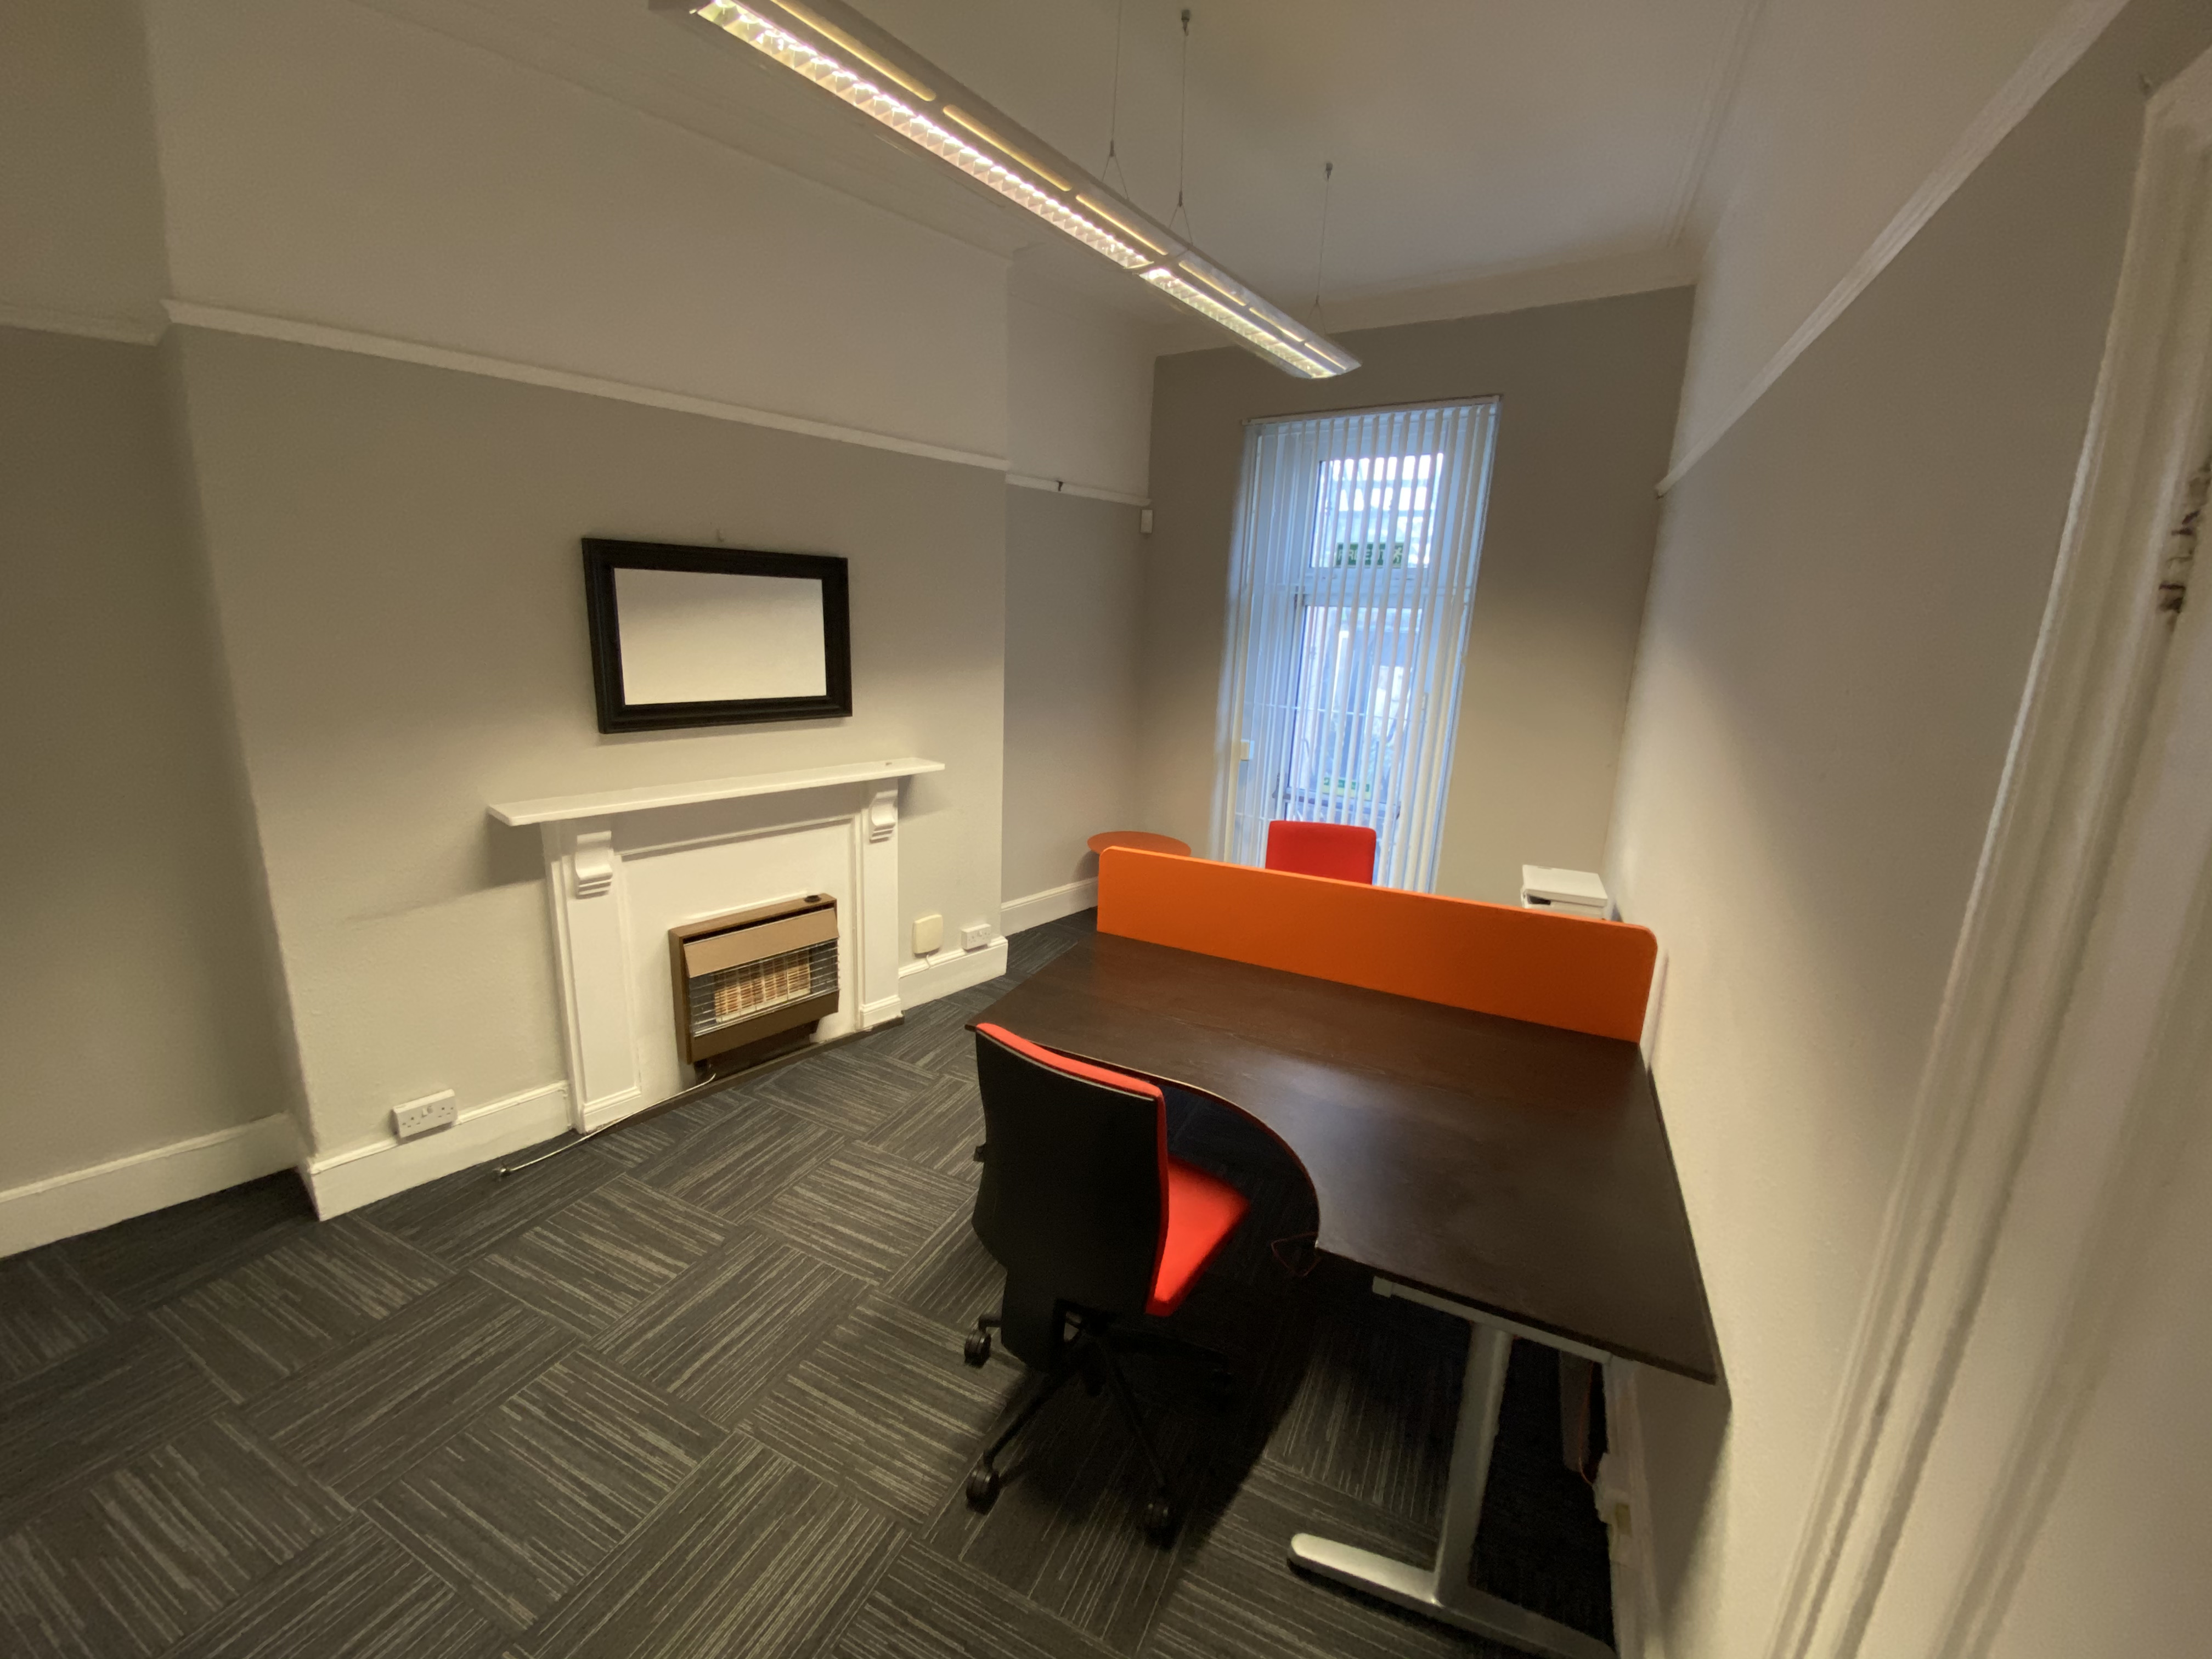 2 person office in Uplands, Swansea